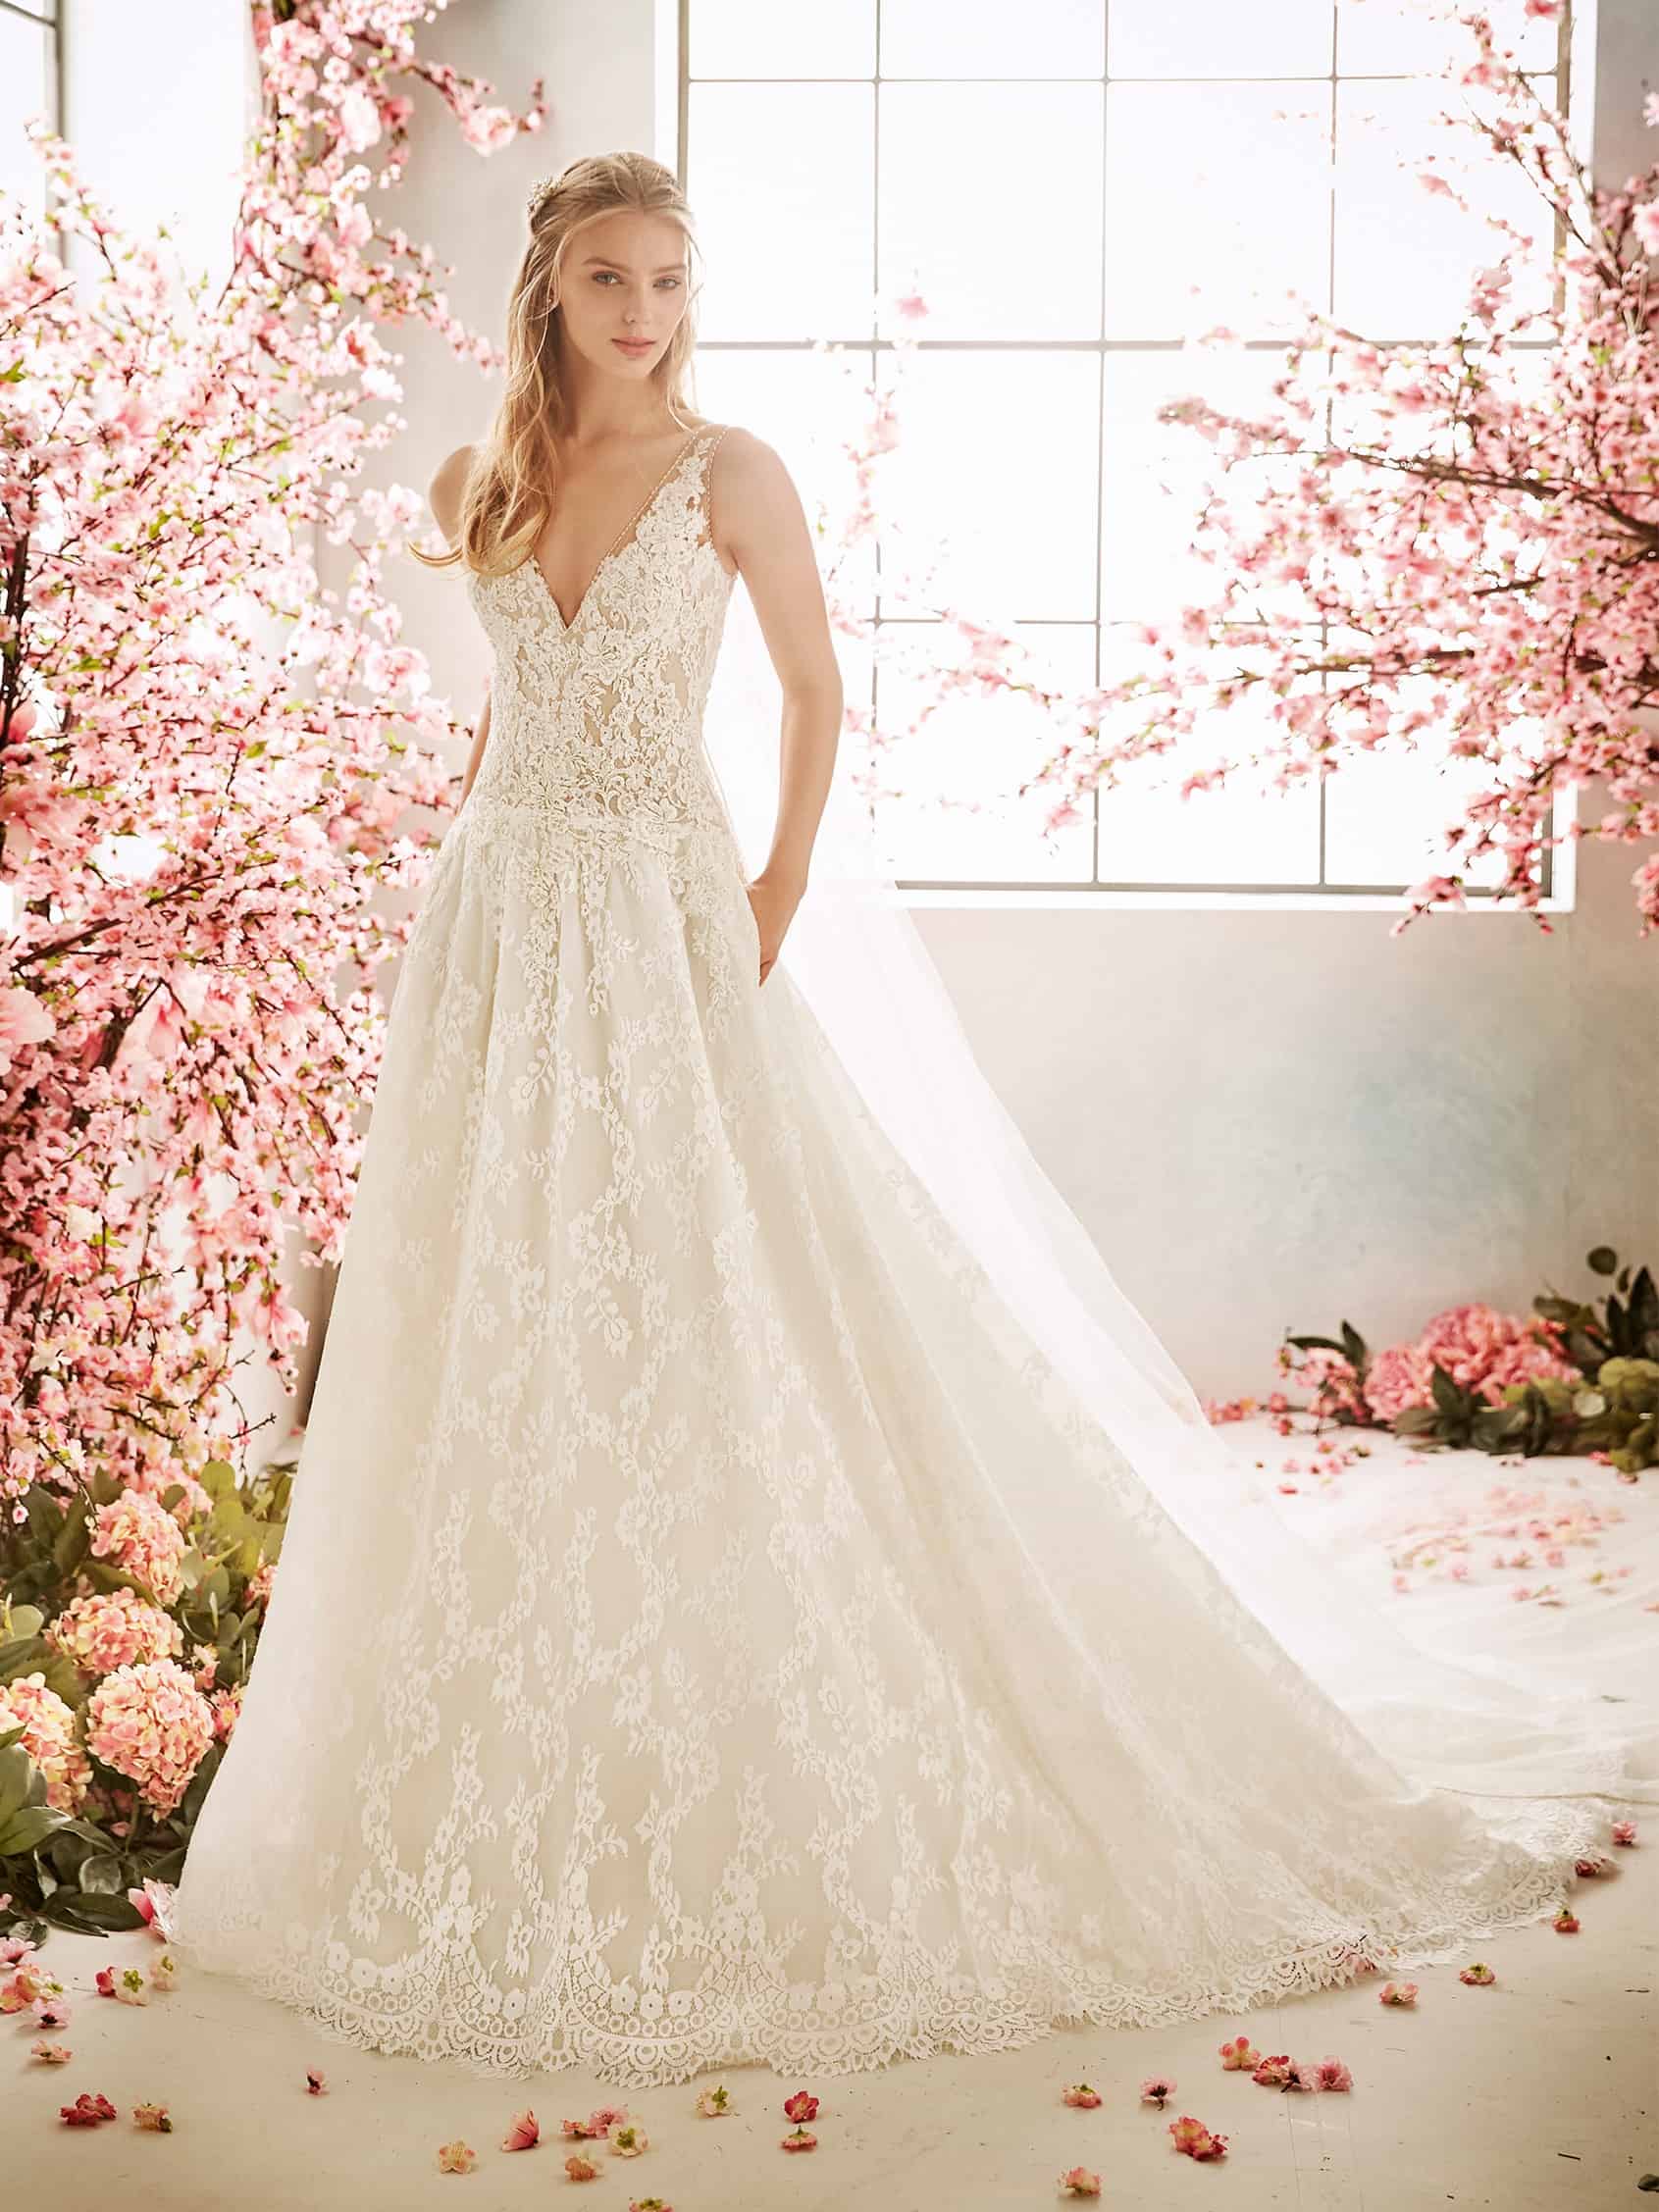 Stunning fully laced Aline wedding gown, deep V neck